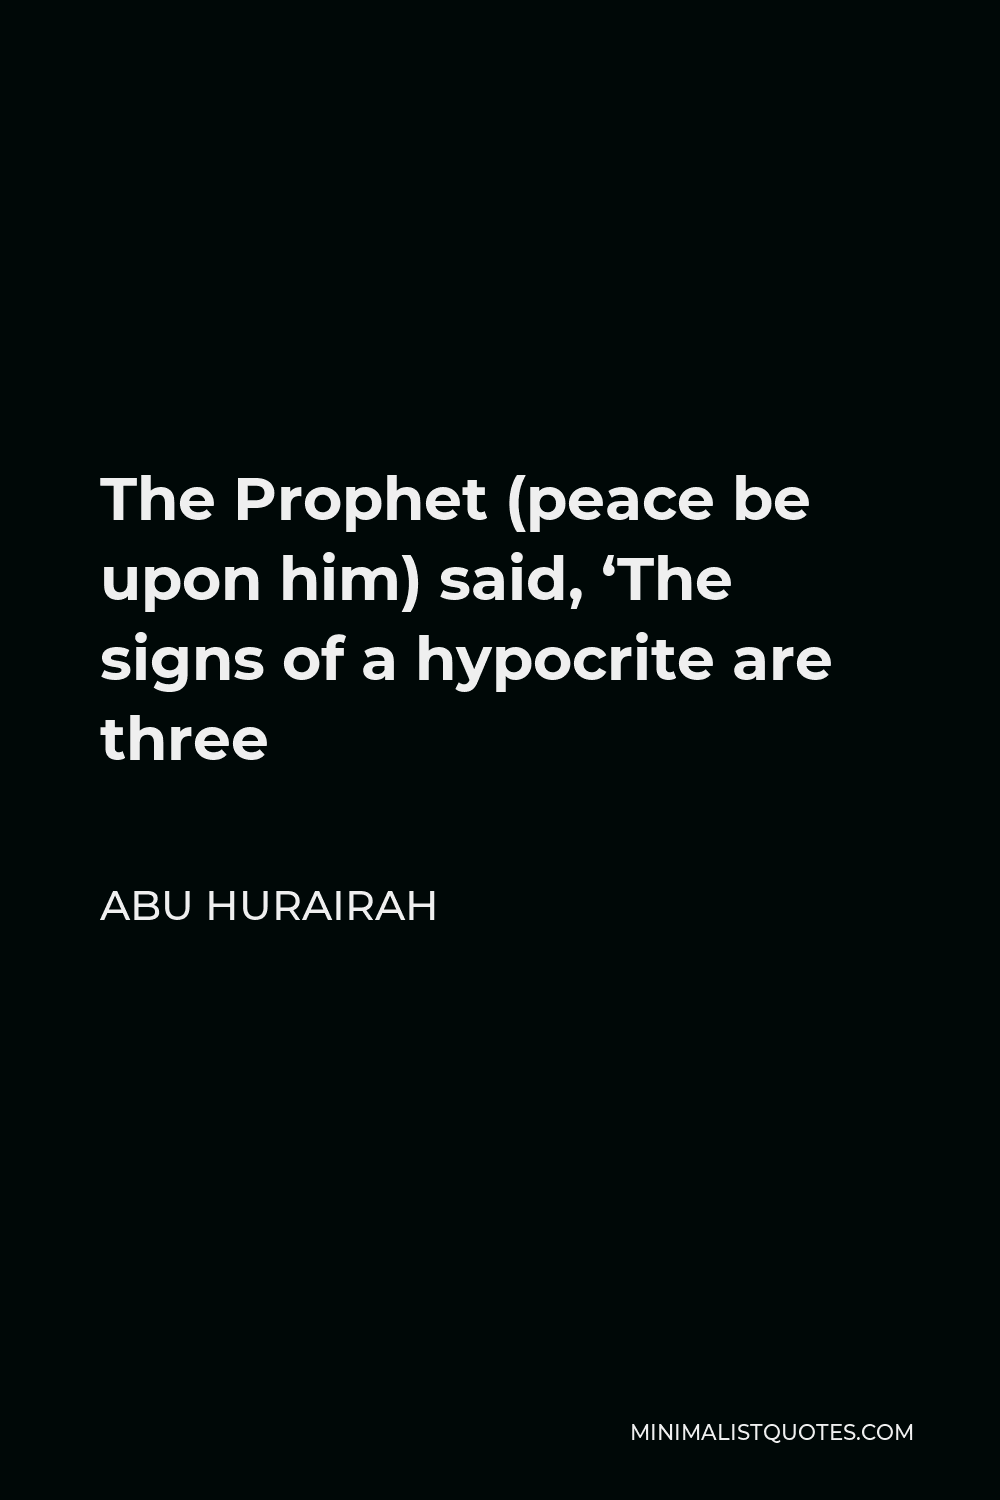 Abu Hurairah Quote - The Prophet (peace be upon him) said, ‘The signs of a hypocrite are three